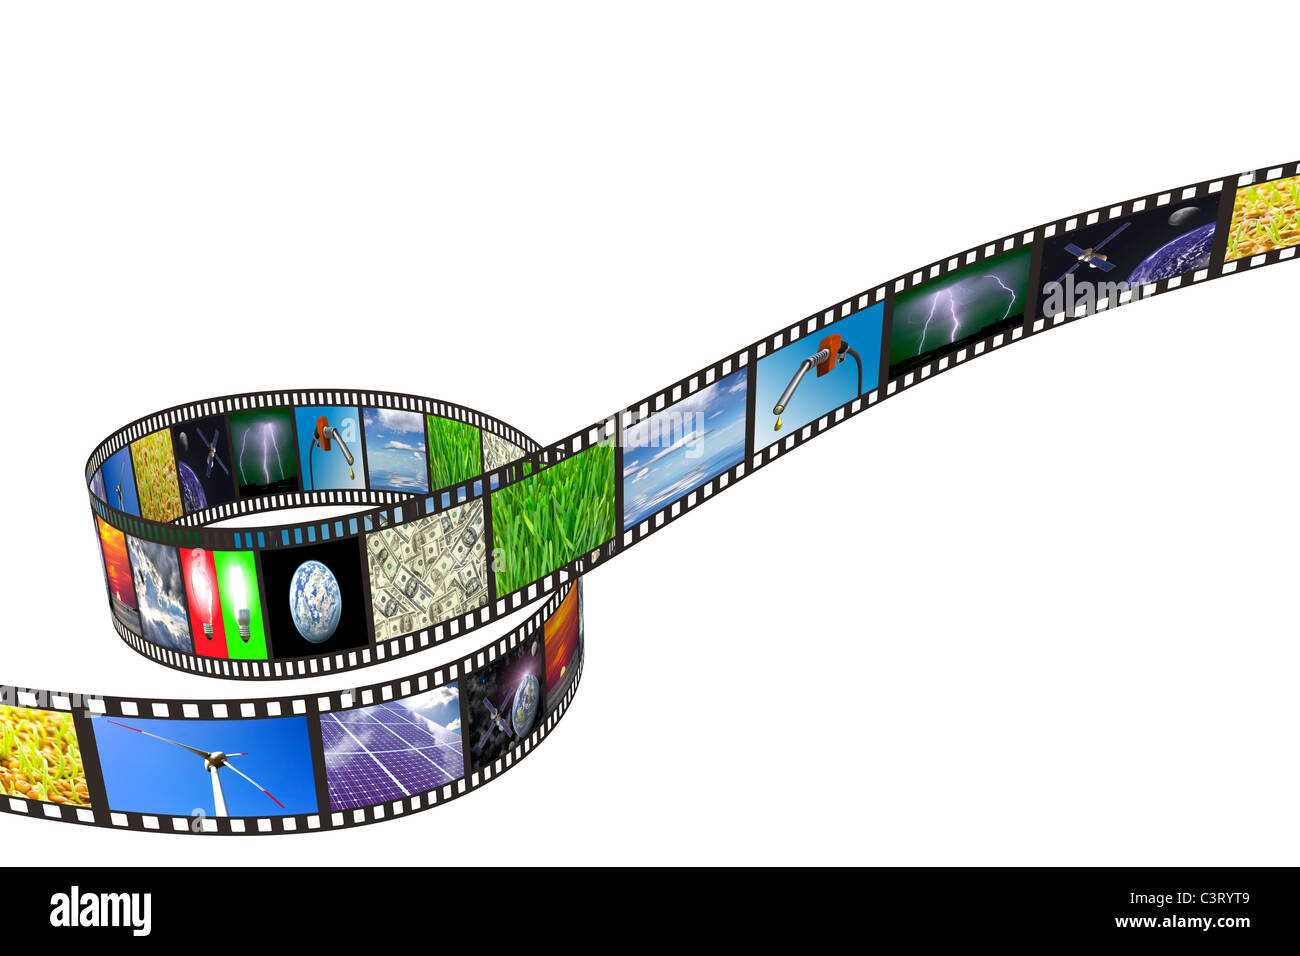 Filmstrip with technology, energy and environment images on white background Stock Photo